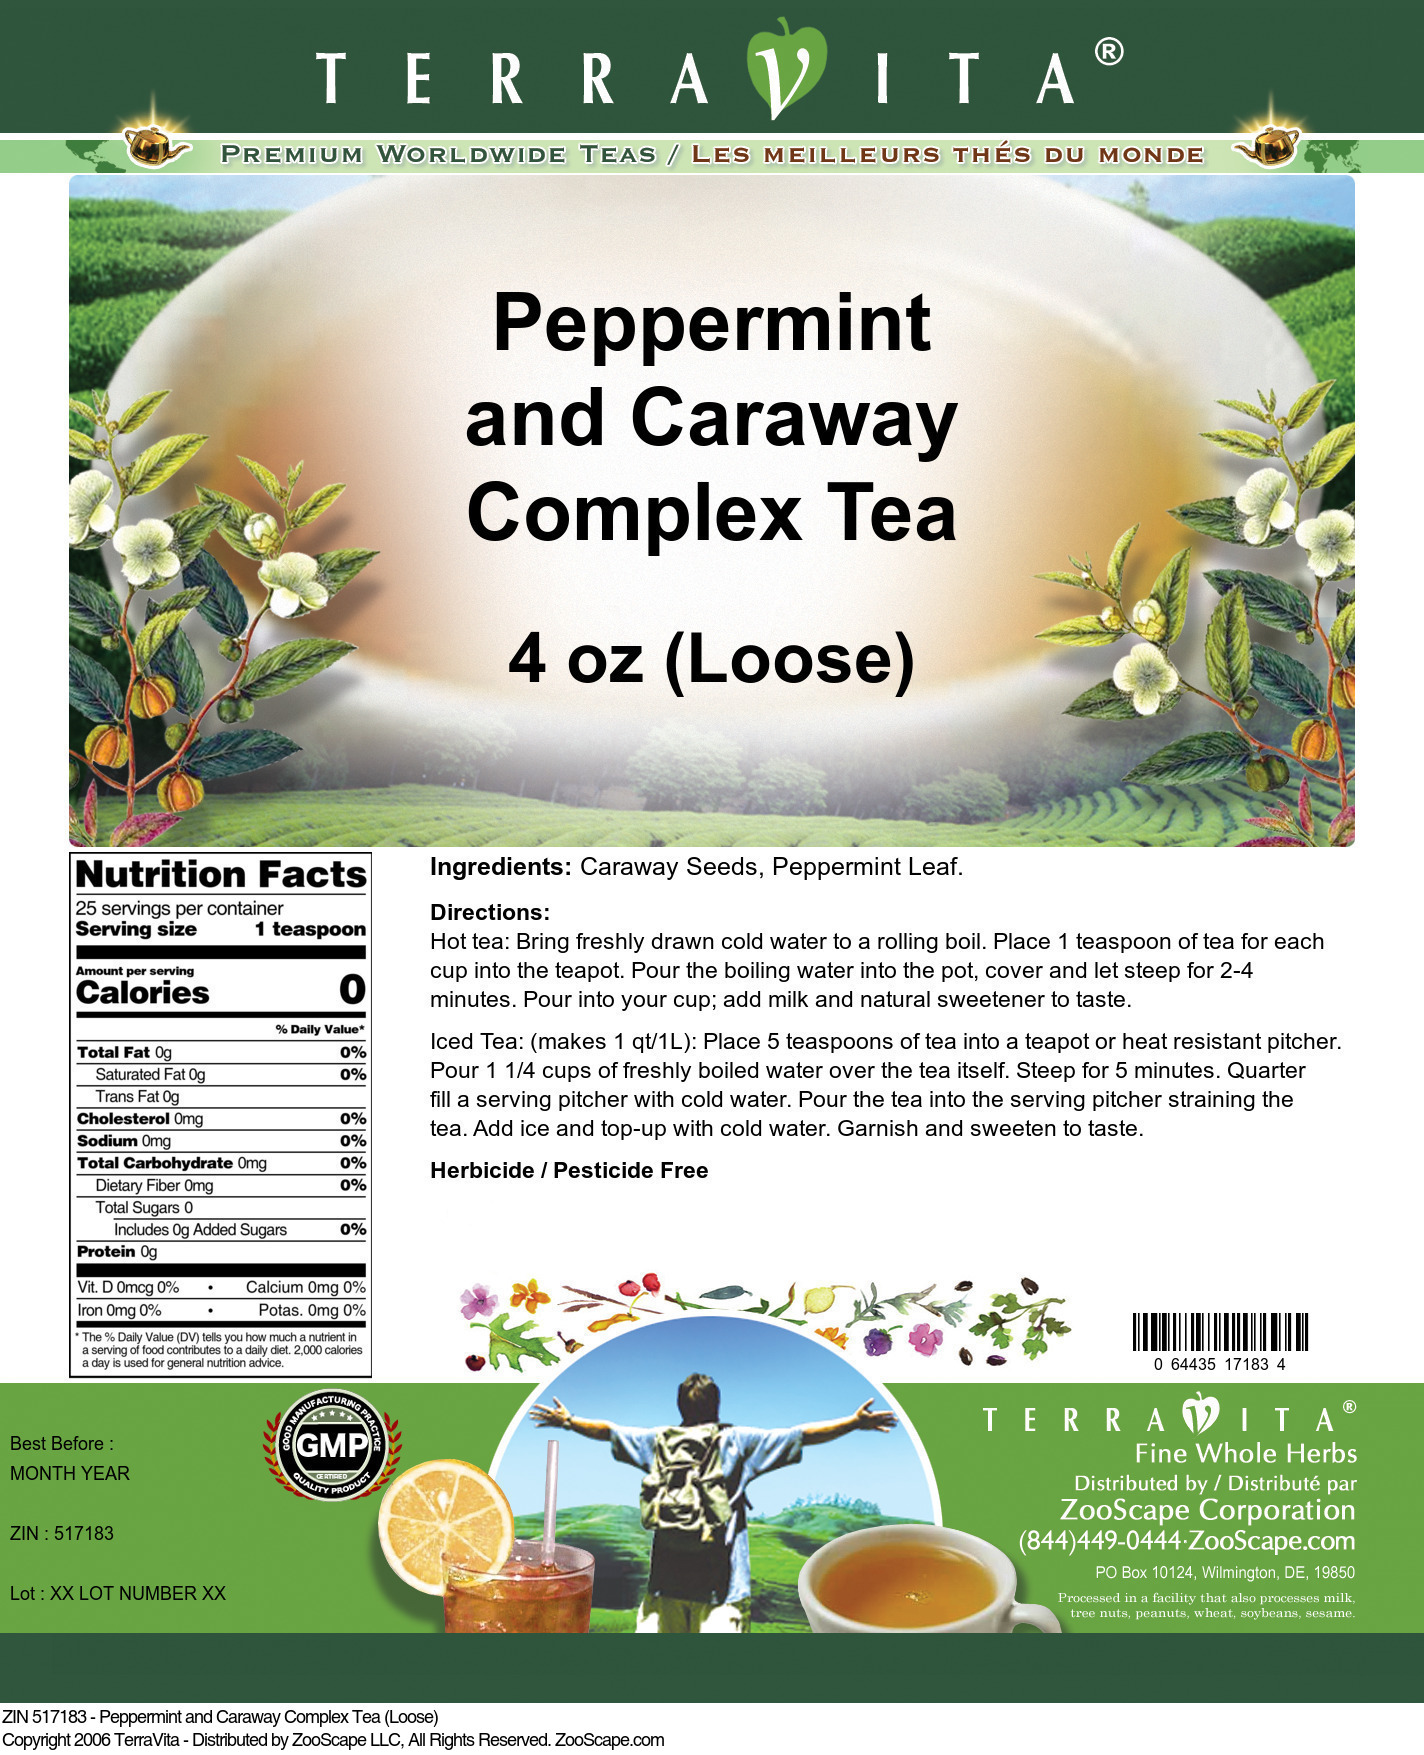 Peppermint and Caraway Complex Tea (Loose) - Label